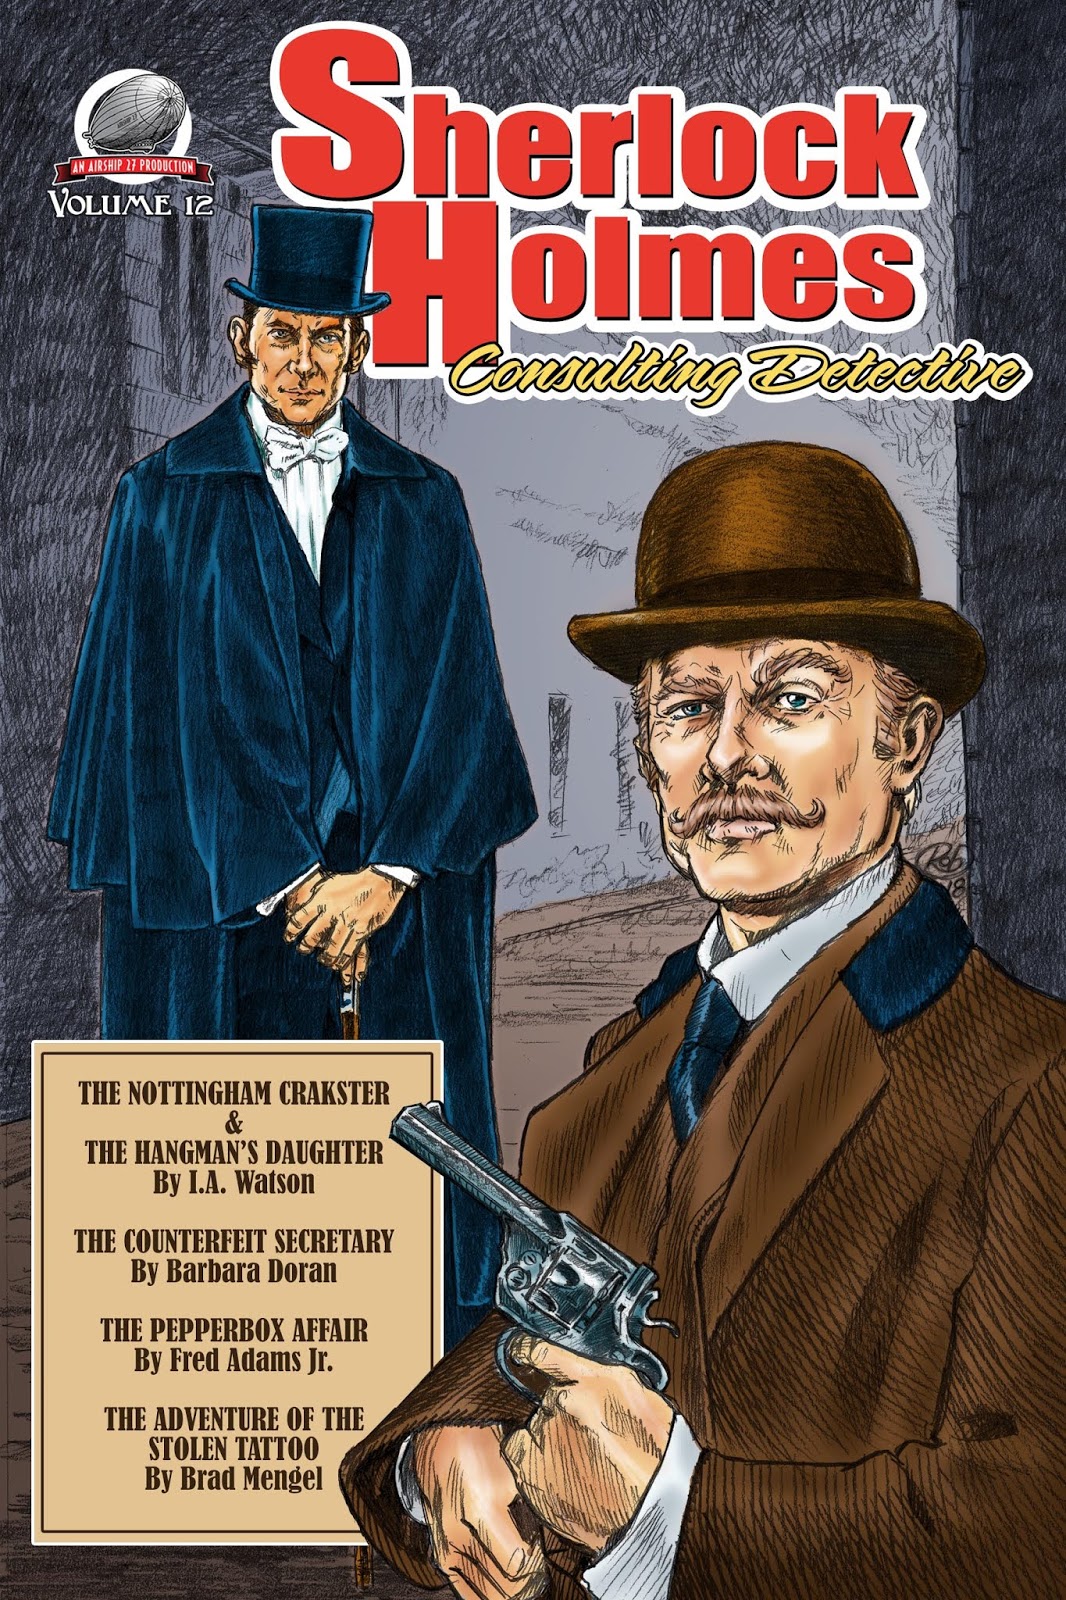 the-pulp-factory-sherlock-holmes-consulting-detective-vol-12